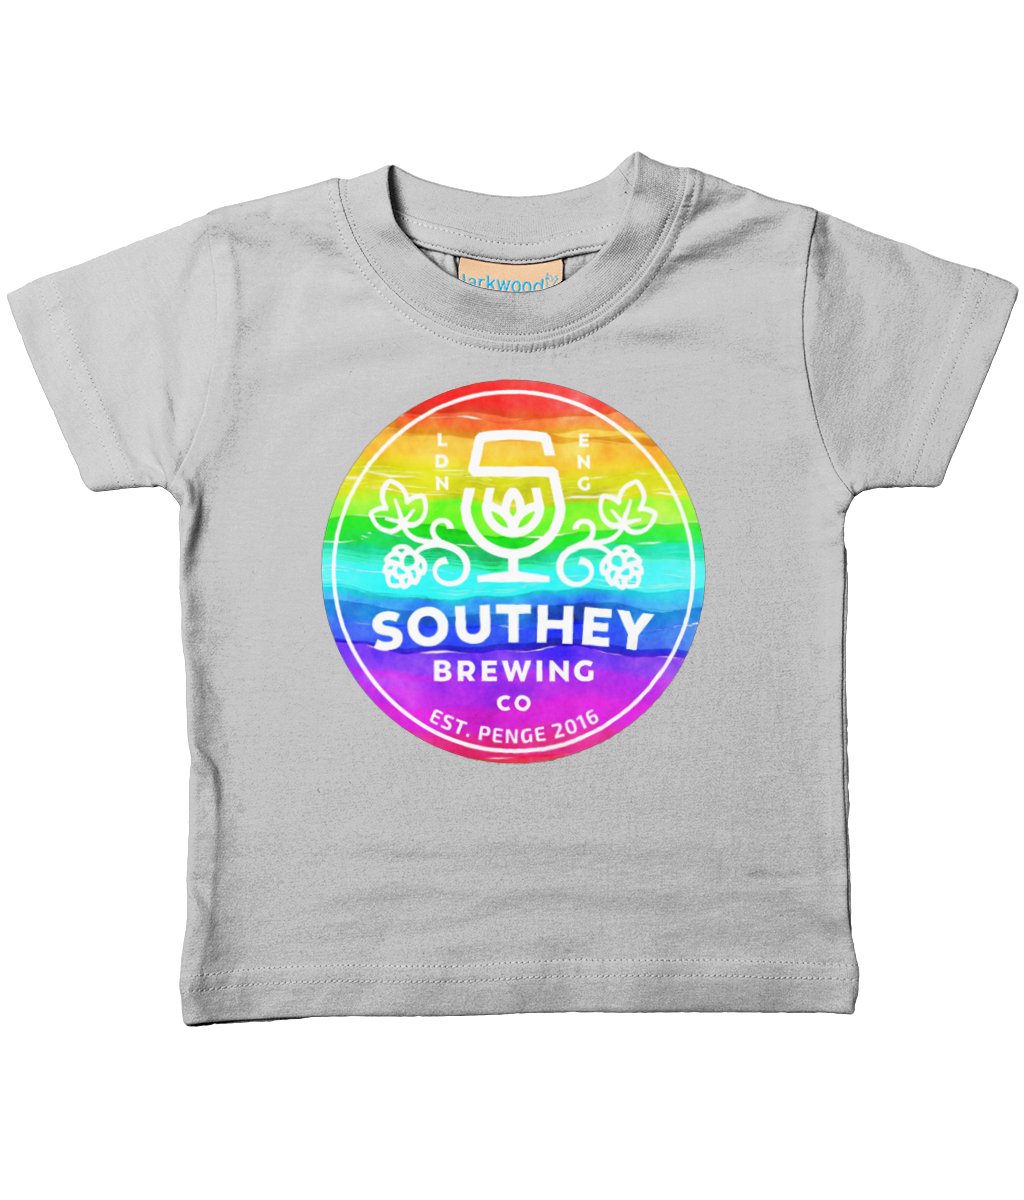 Baby/Toddler Rainbow Logo T-shirt - Southey Brewery Co.